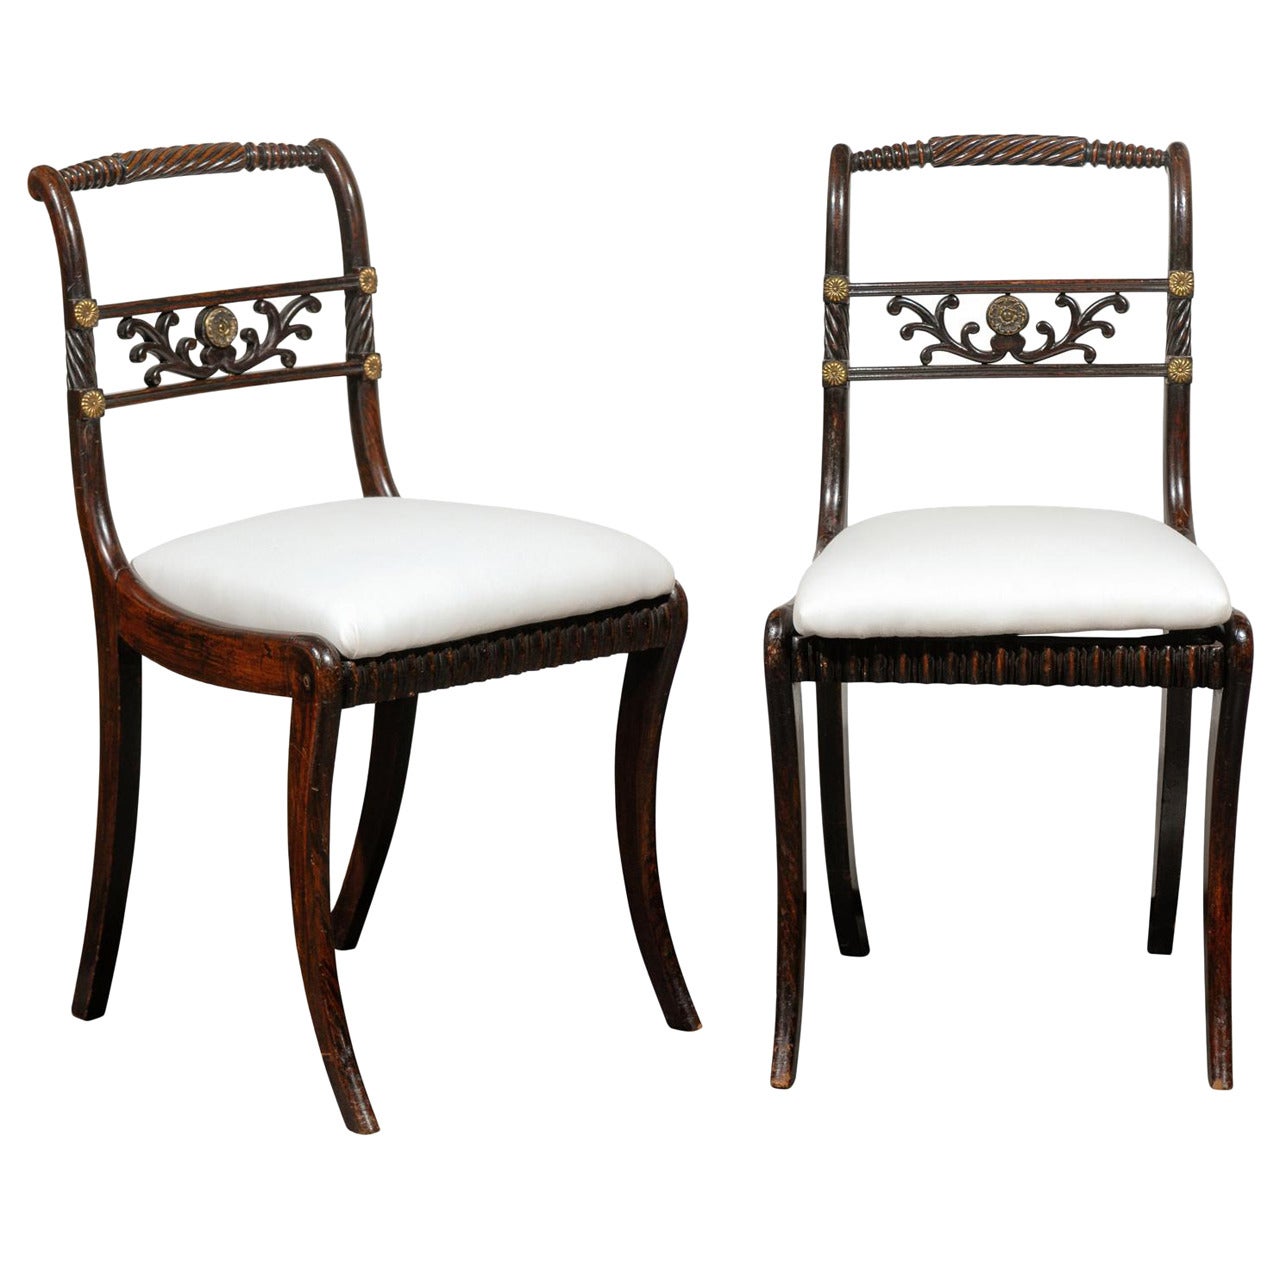 Pair of English Regency Side Chairs